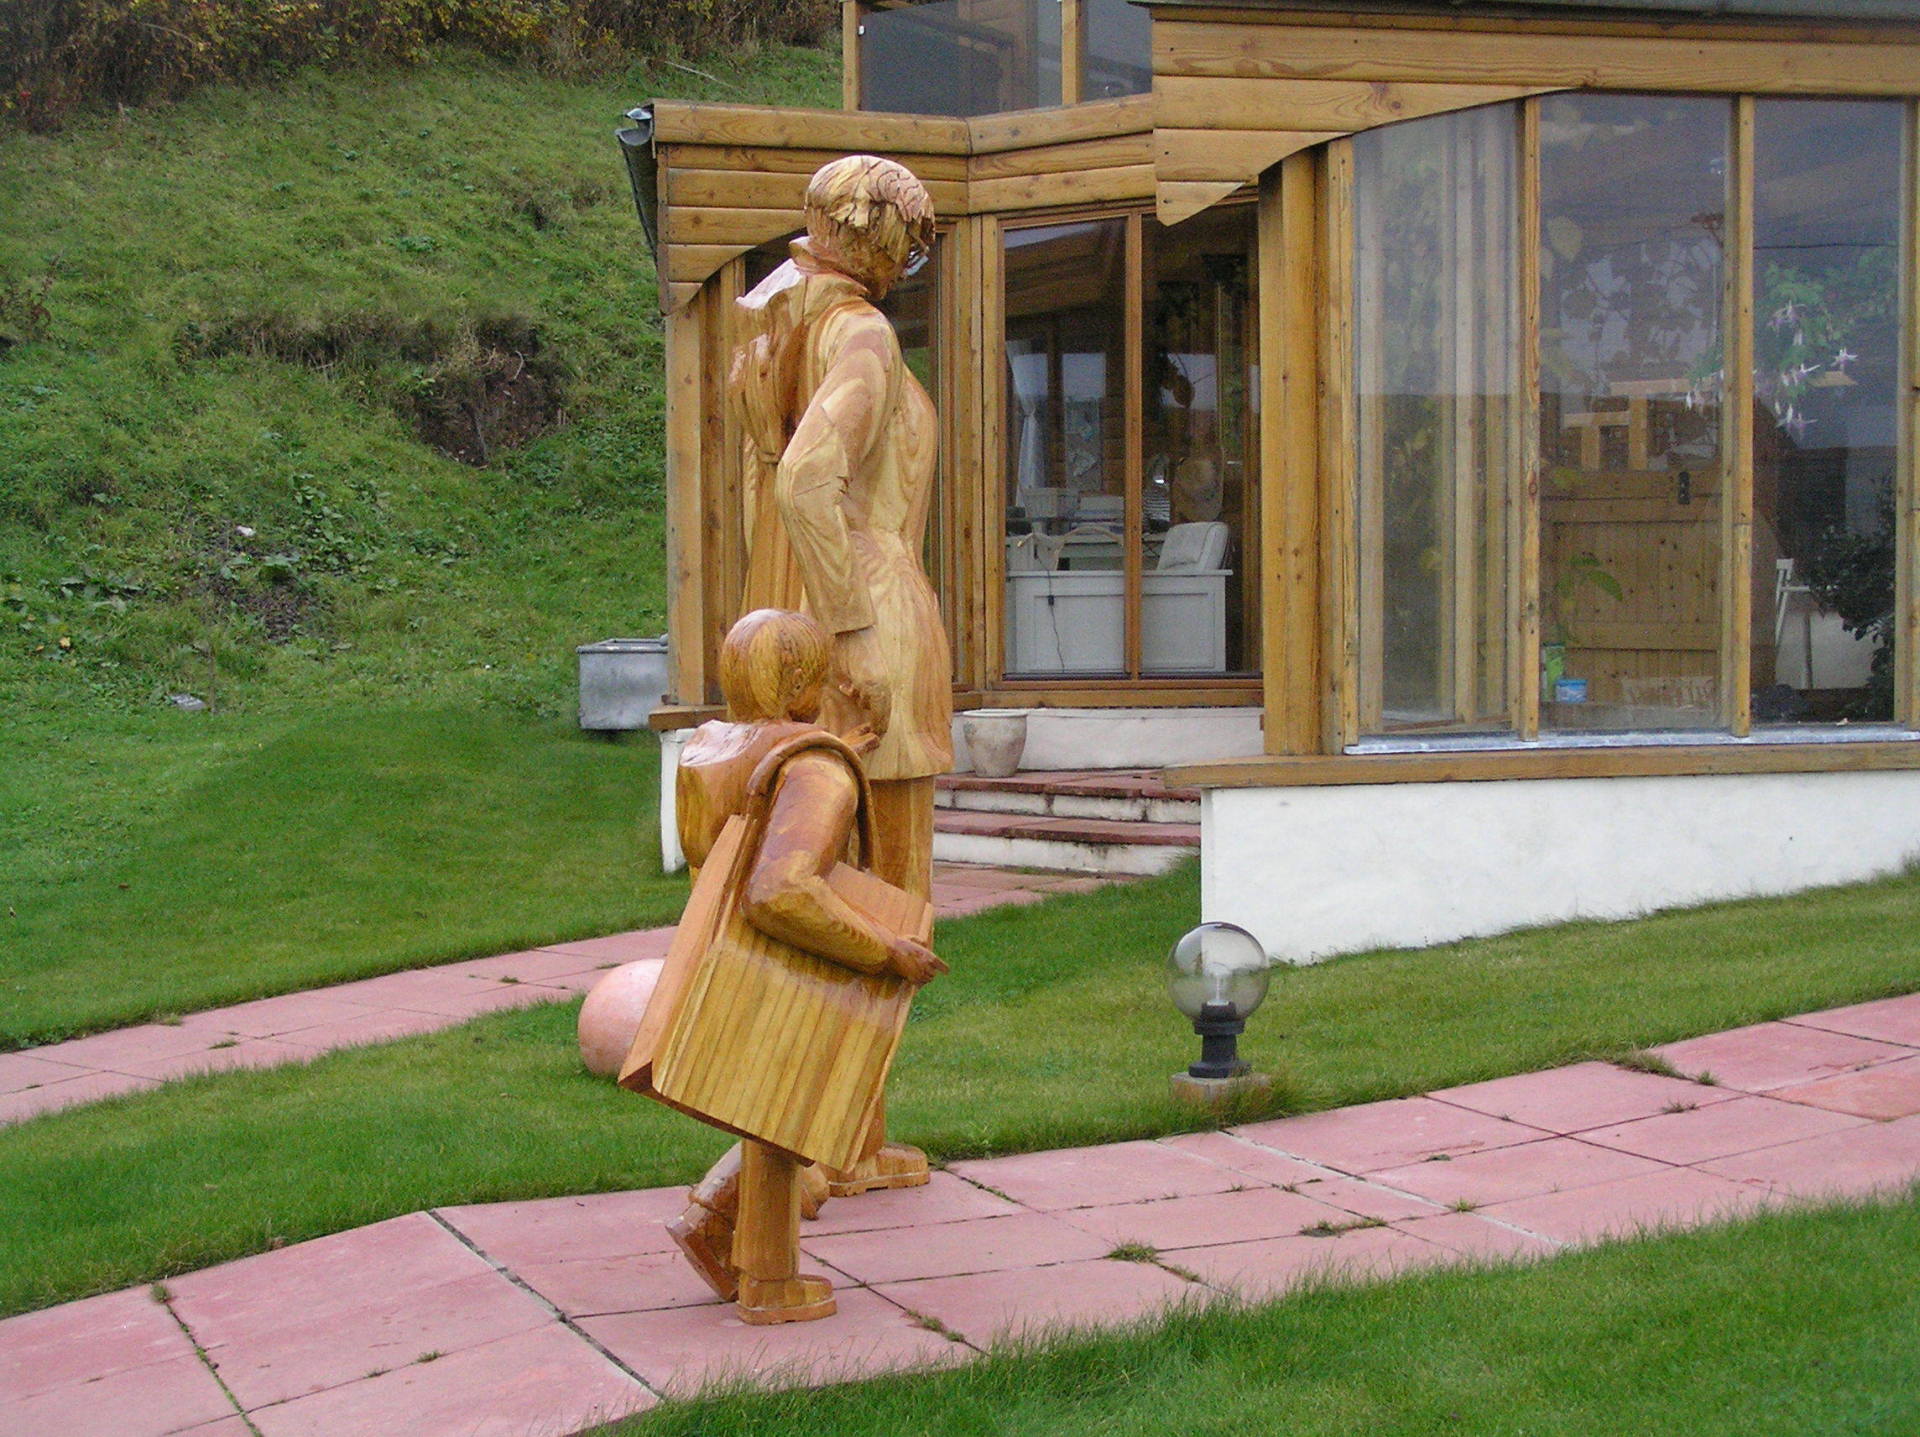 Figurative sculpture made from Eco-friendly British wood, made by Ingrained Culture.